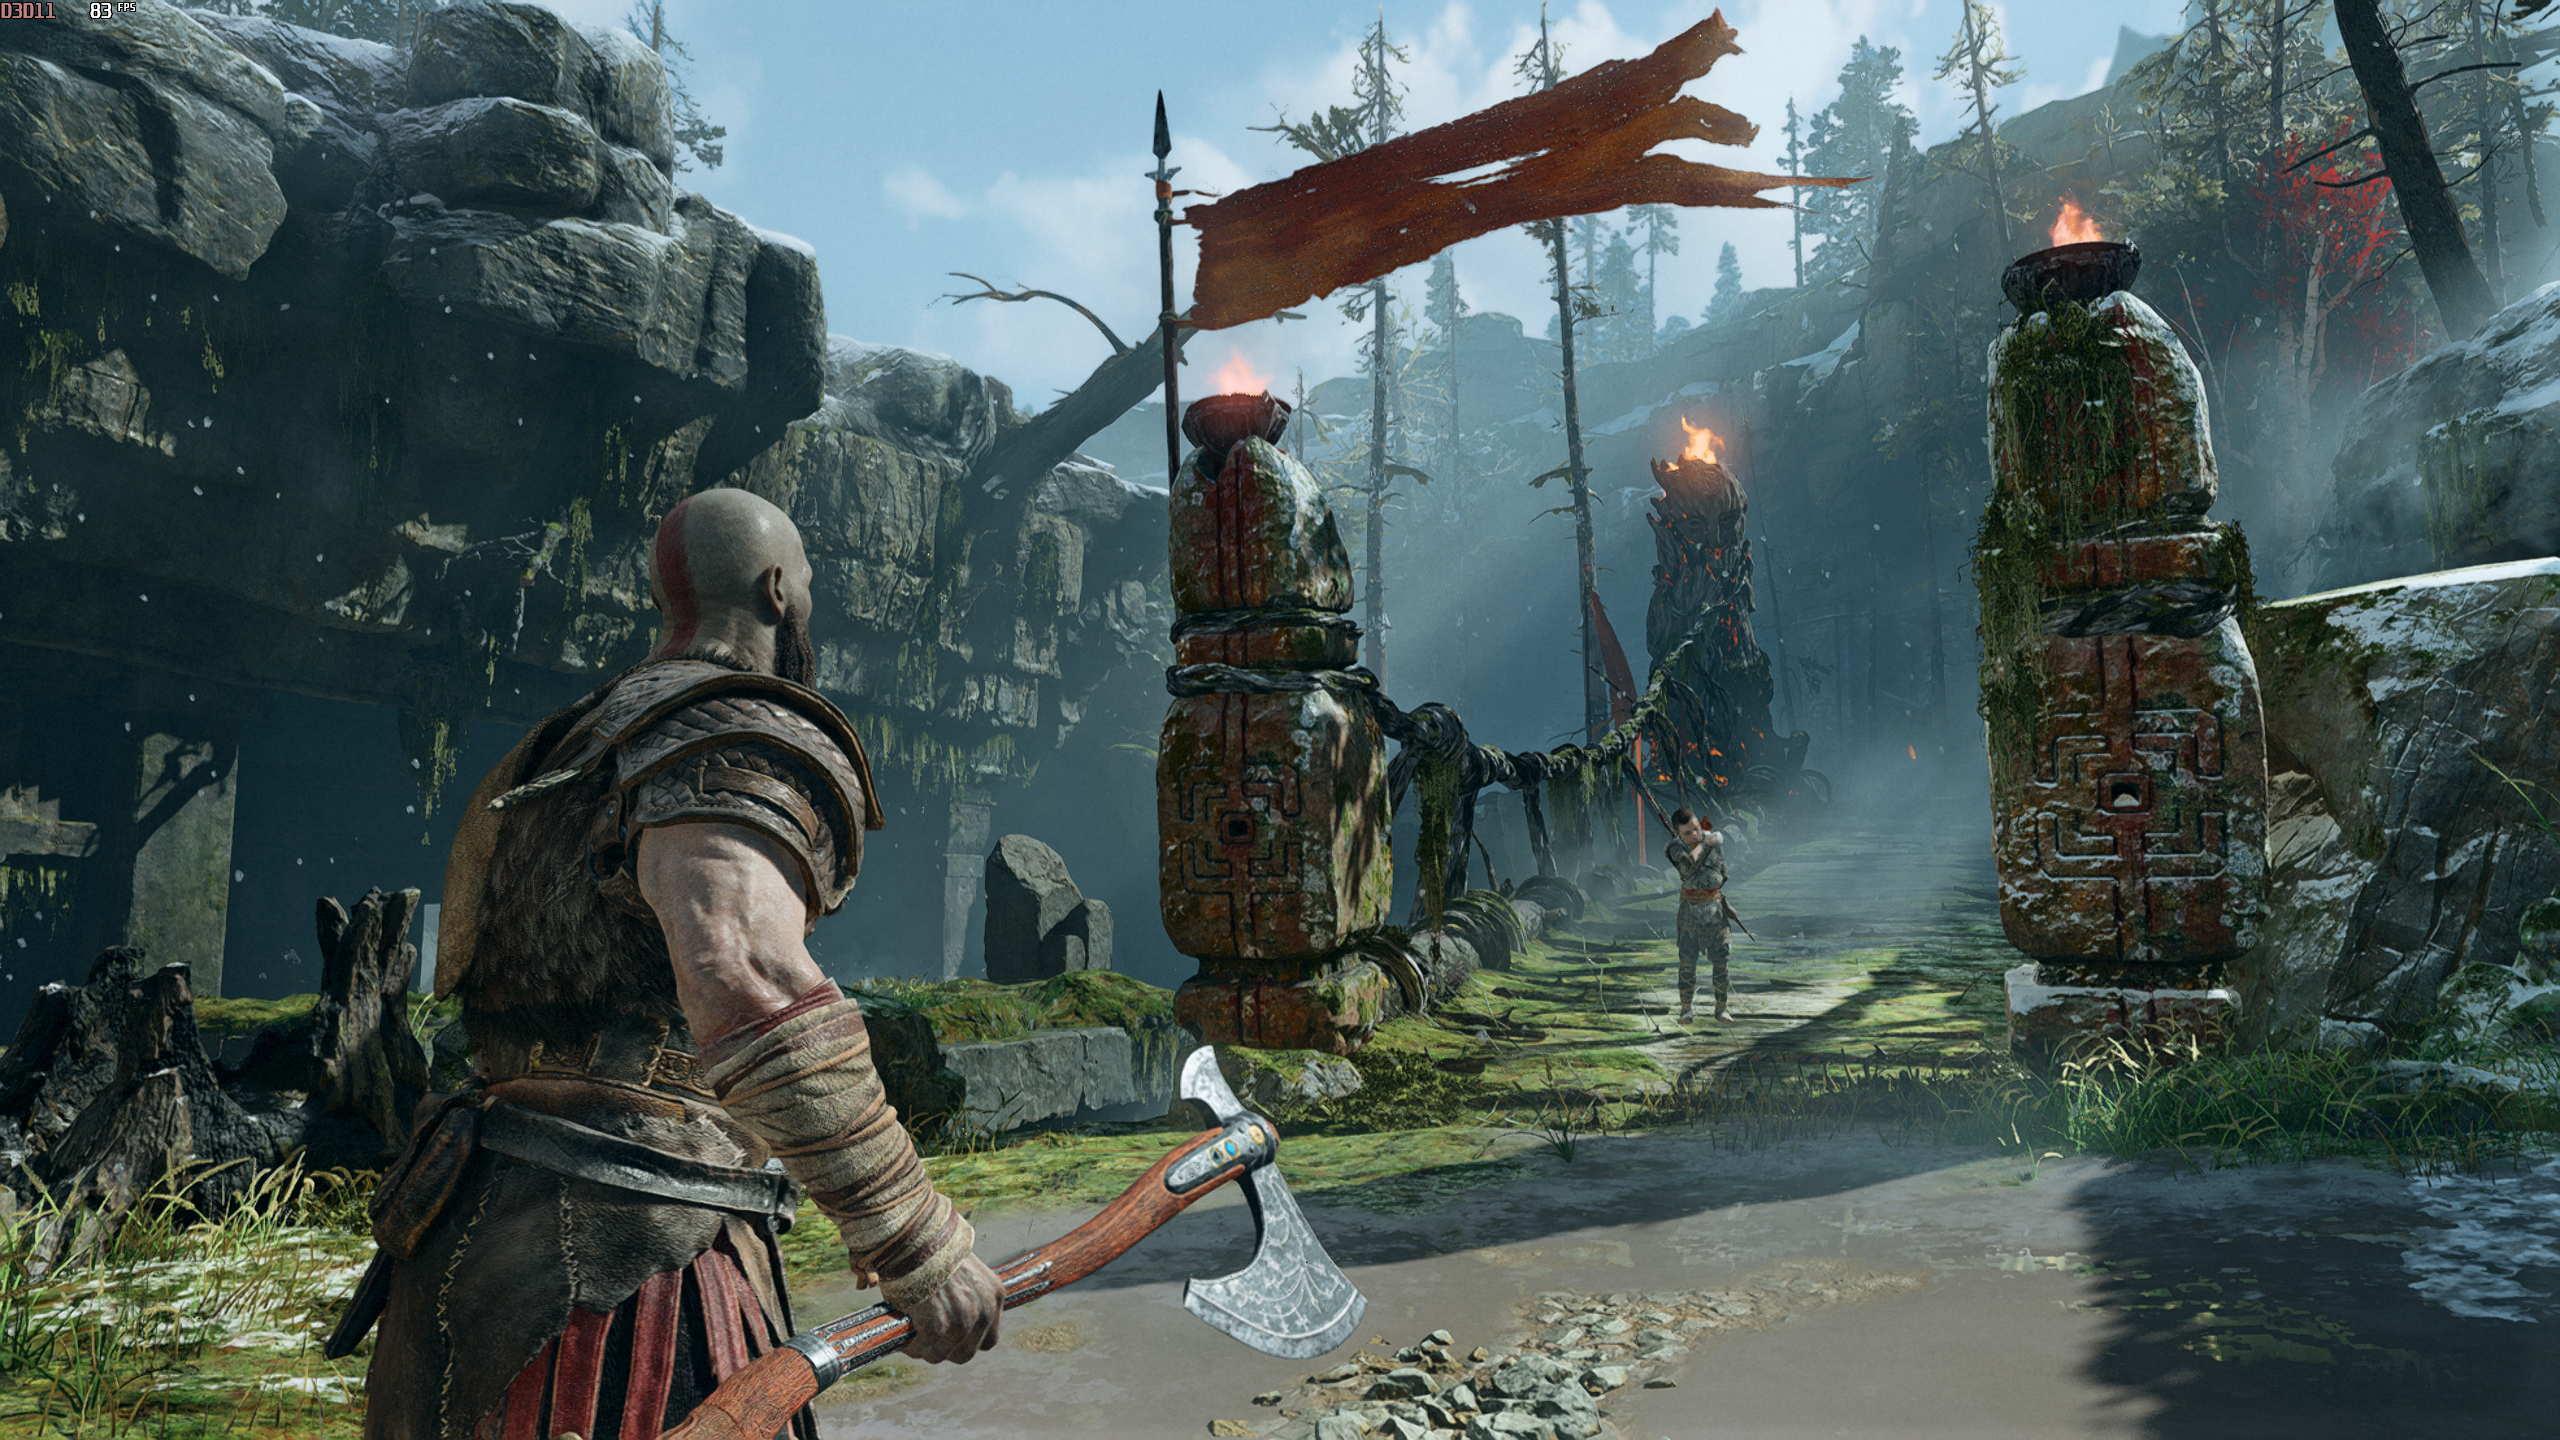 A scene from God of War showing FidelityFX Super Resolution on its Ultra Quality setting.